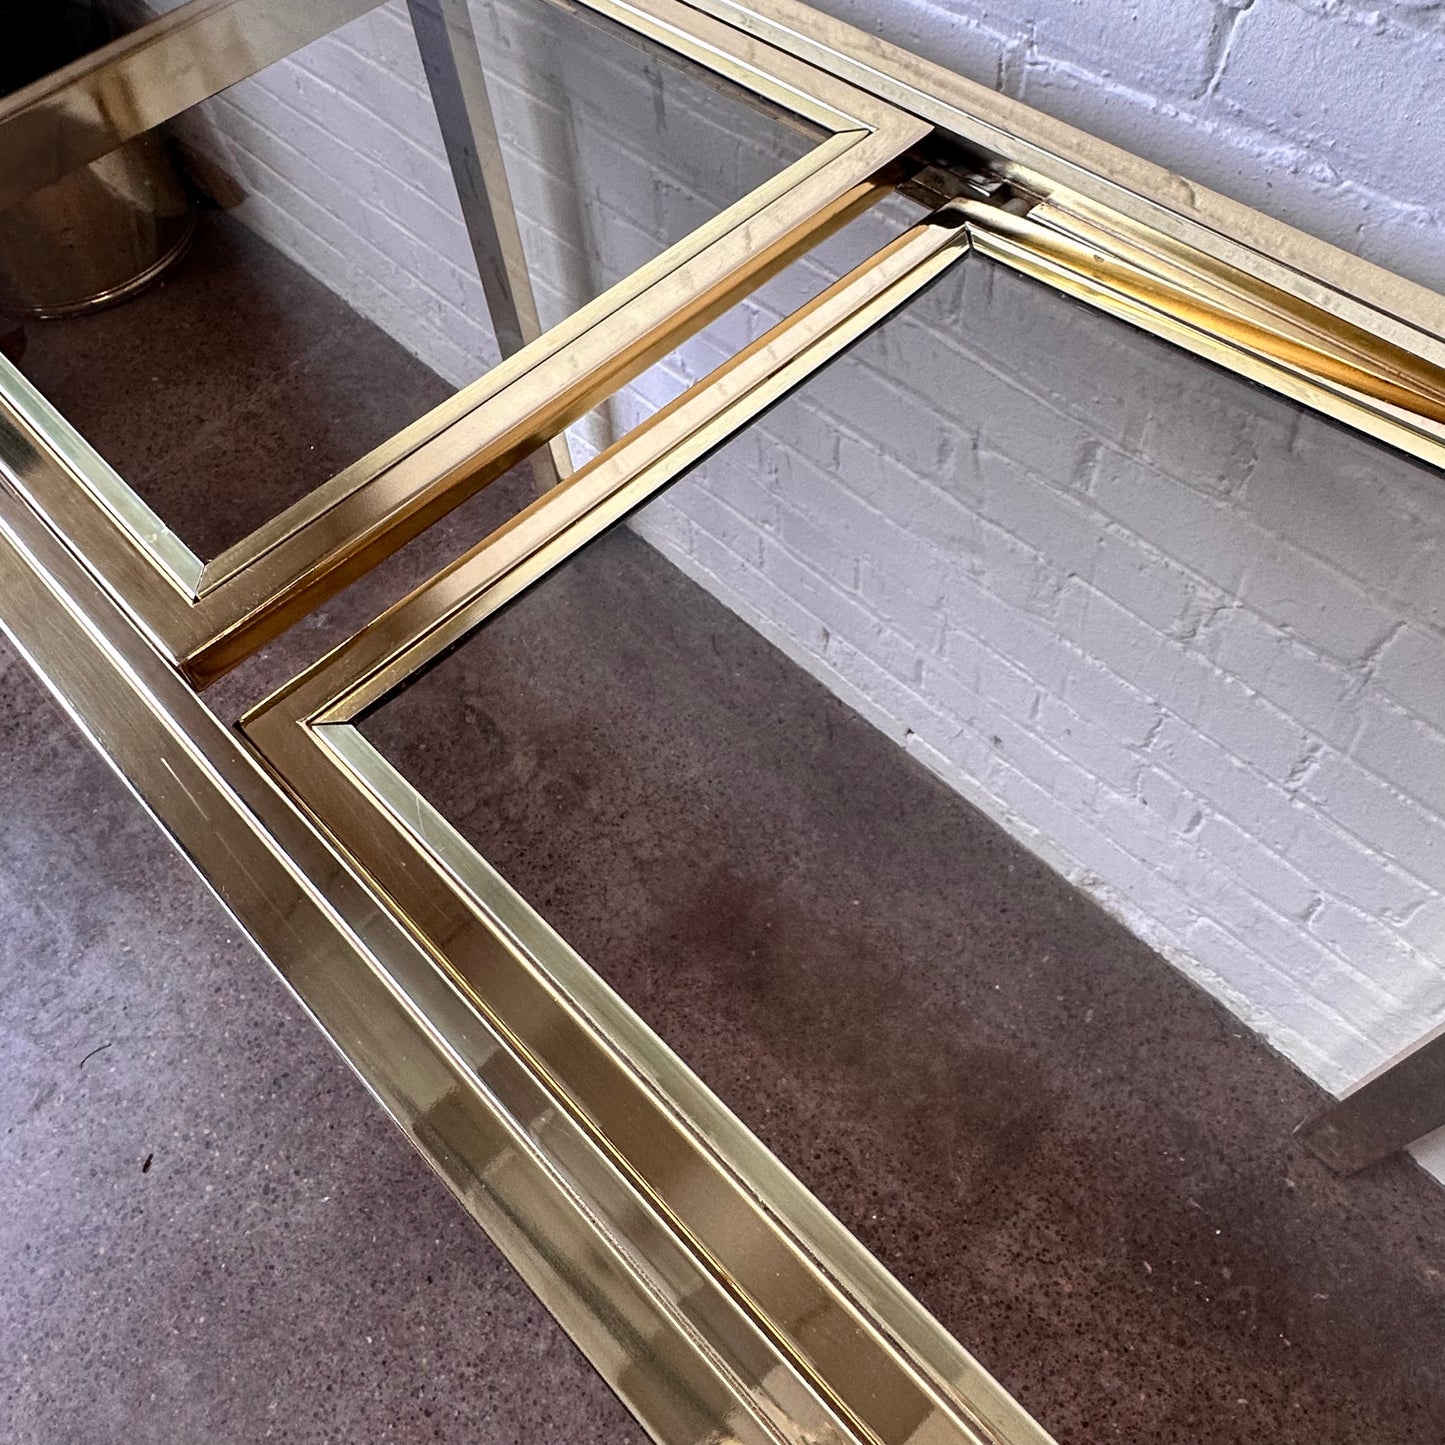 EXPANDABLE BRASS CONSOLE TABLE BY DESIGN INSTITUTE OF AMERICA